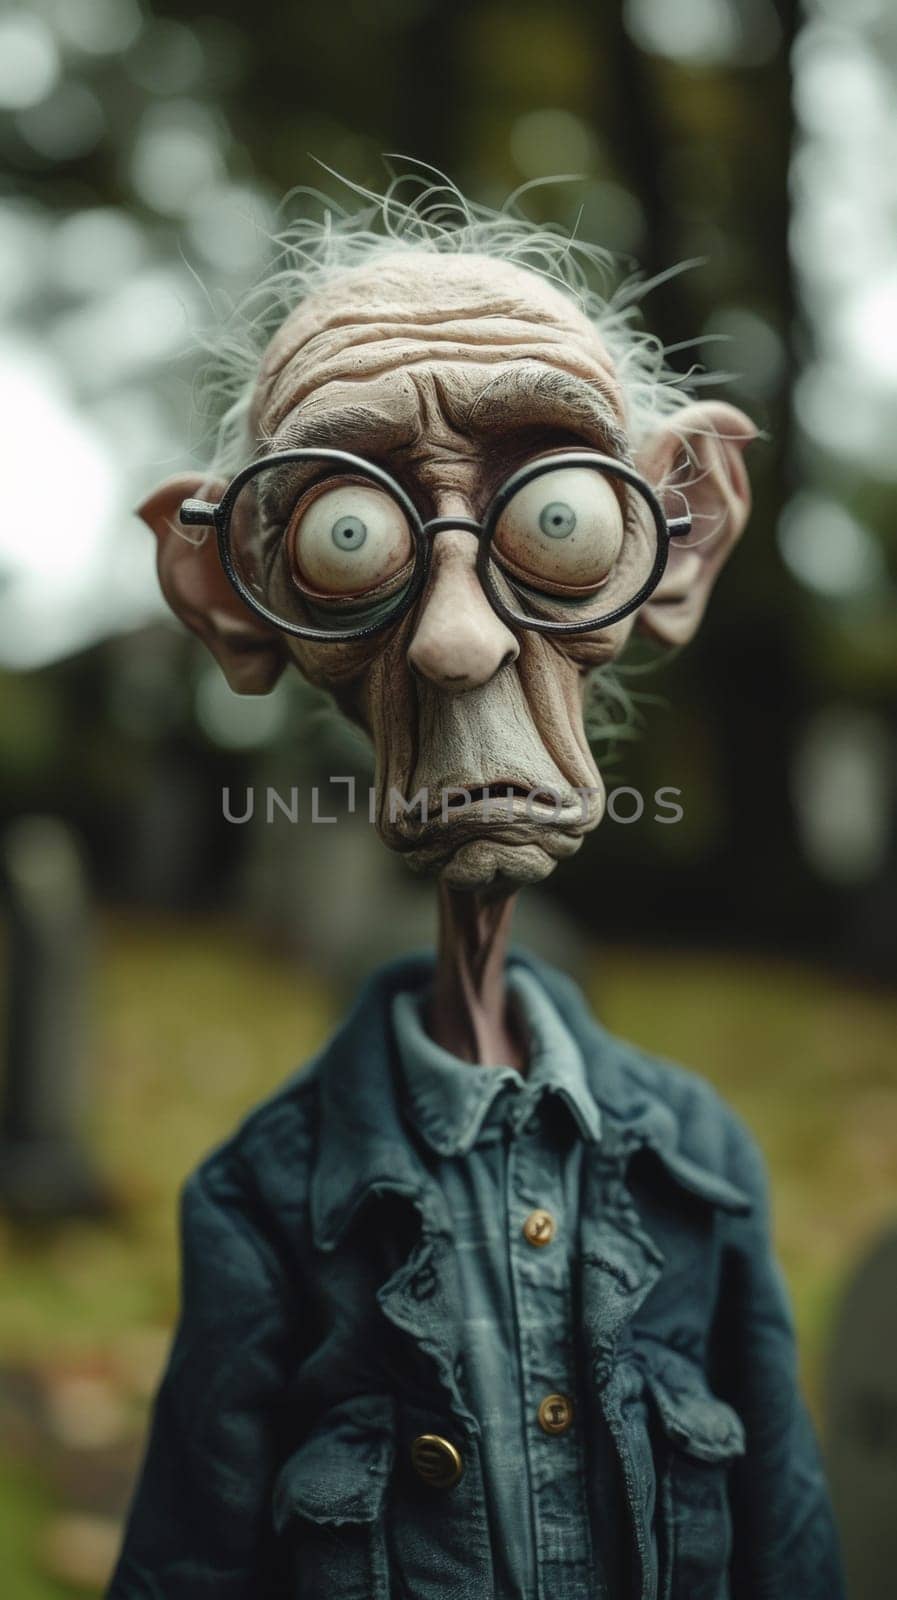 A creepy looking old man with glasses and a jacket, AI by starush